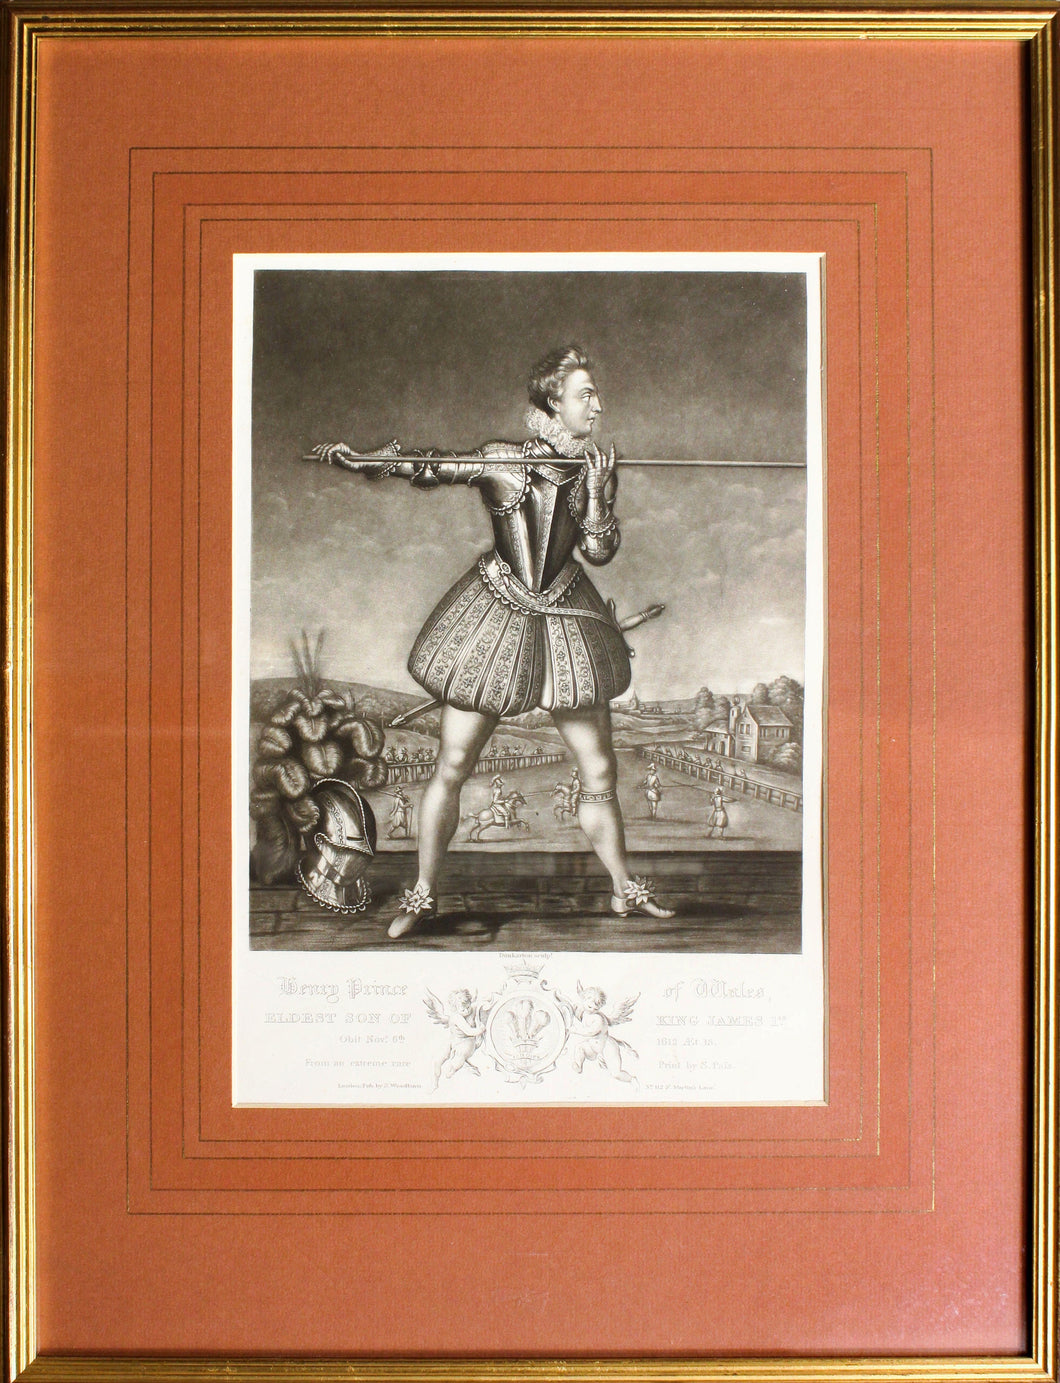 Henry Prince of Wales Exercising with a Lance - Mezzotint circa 1800